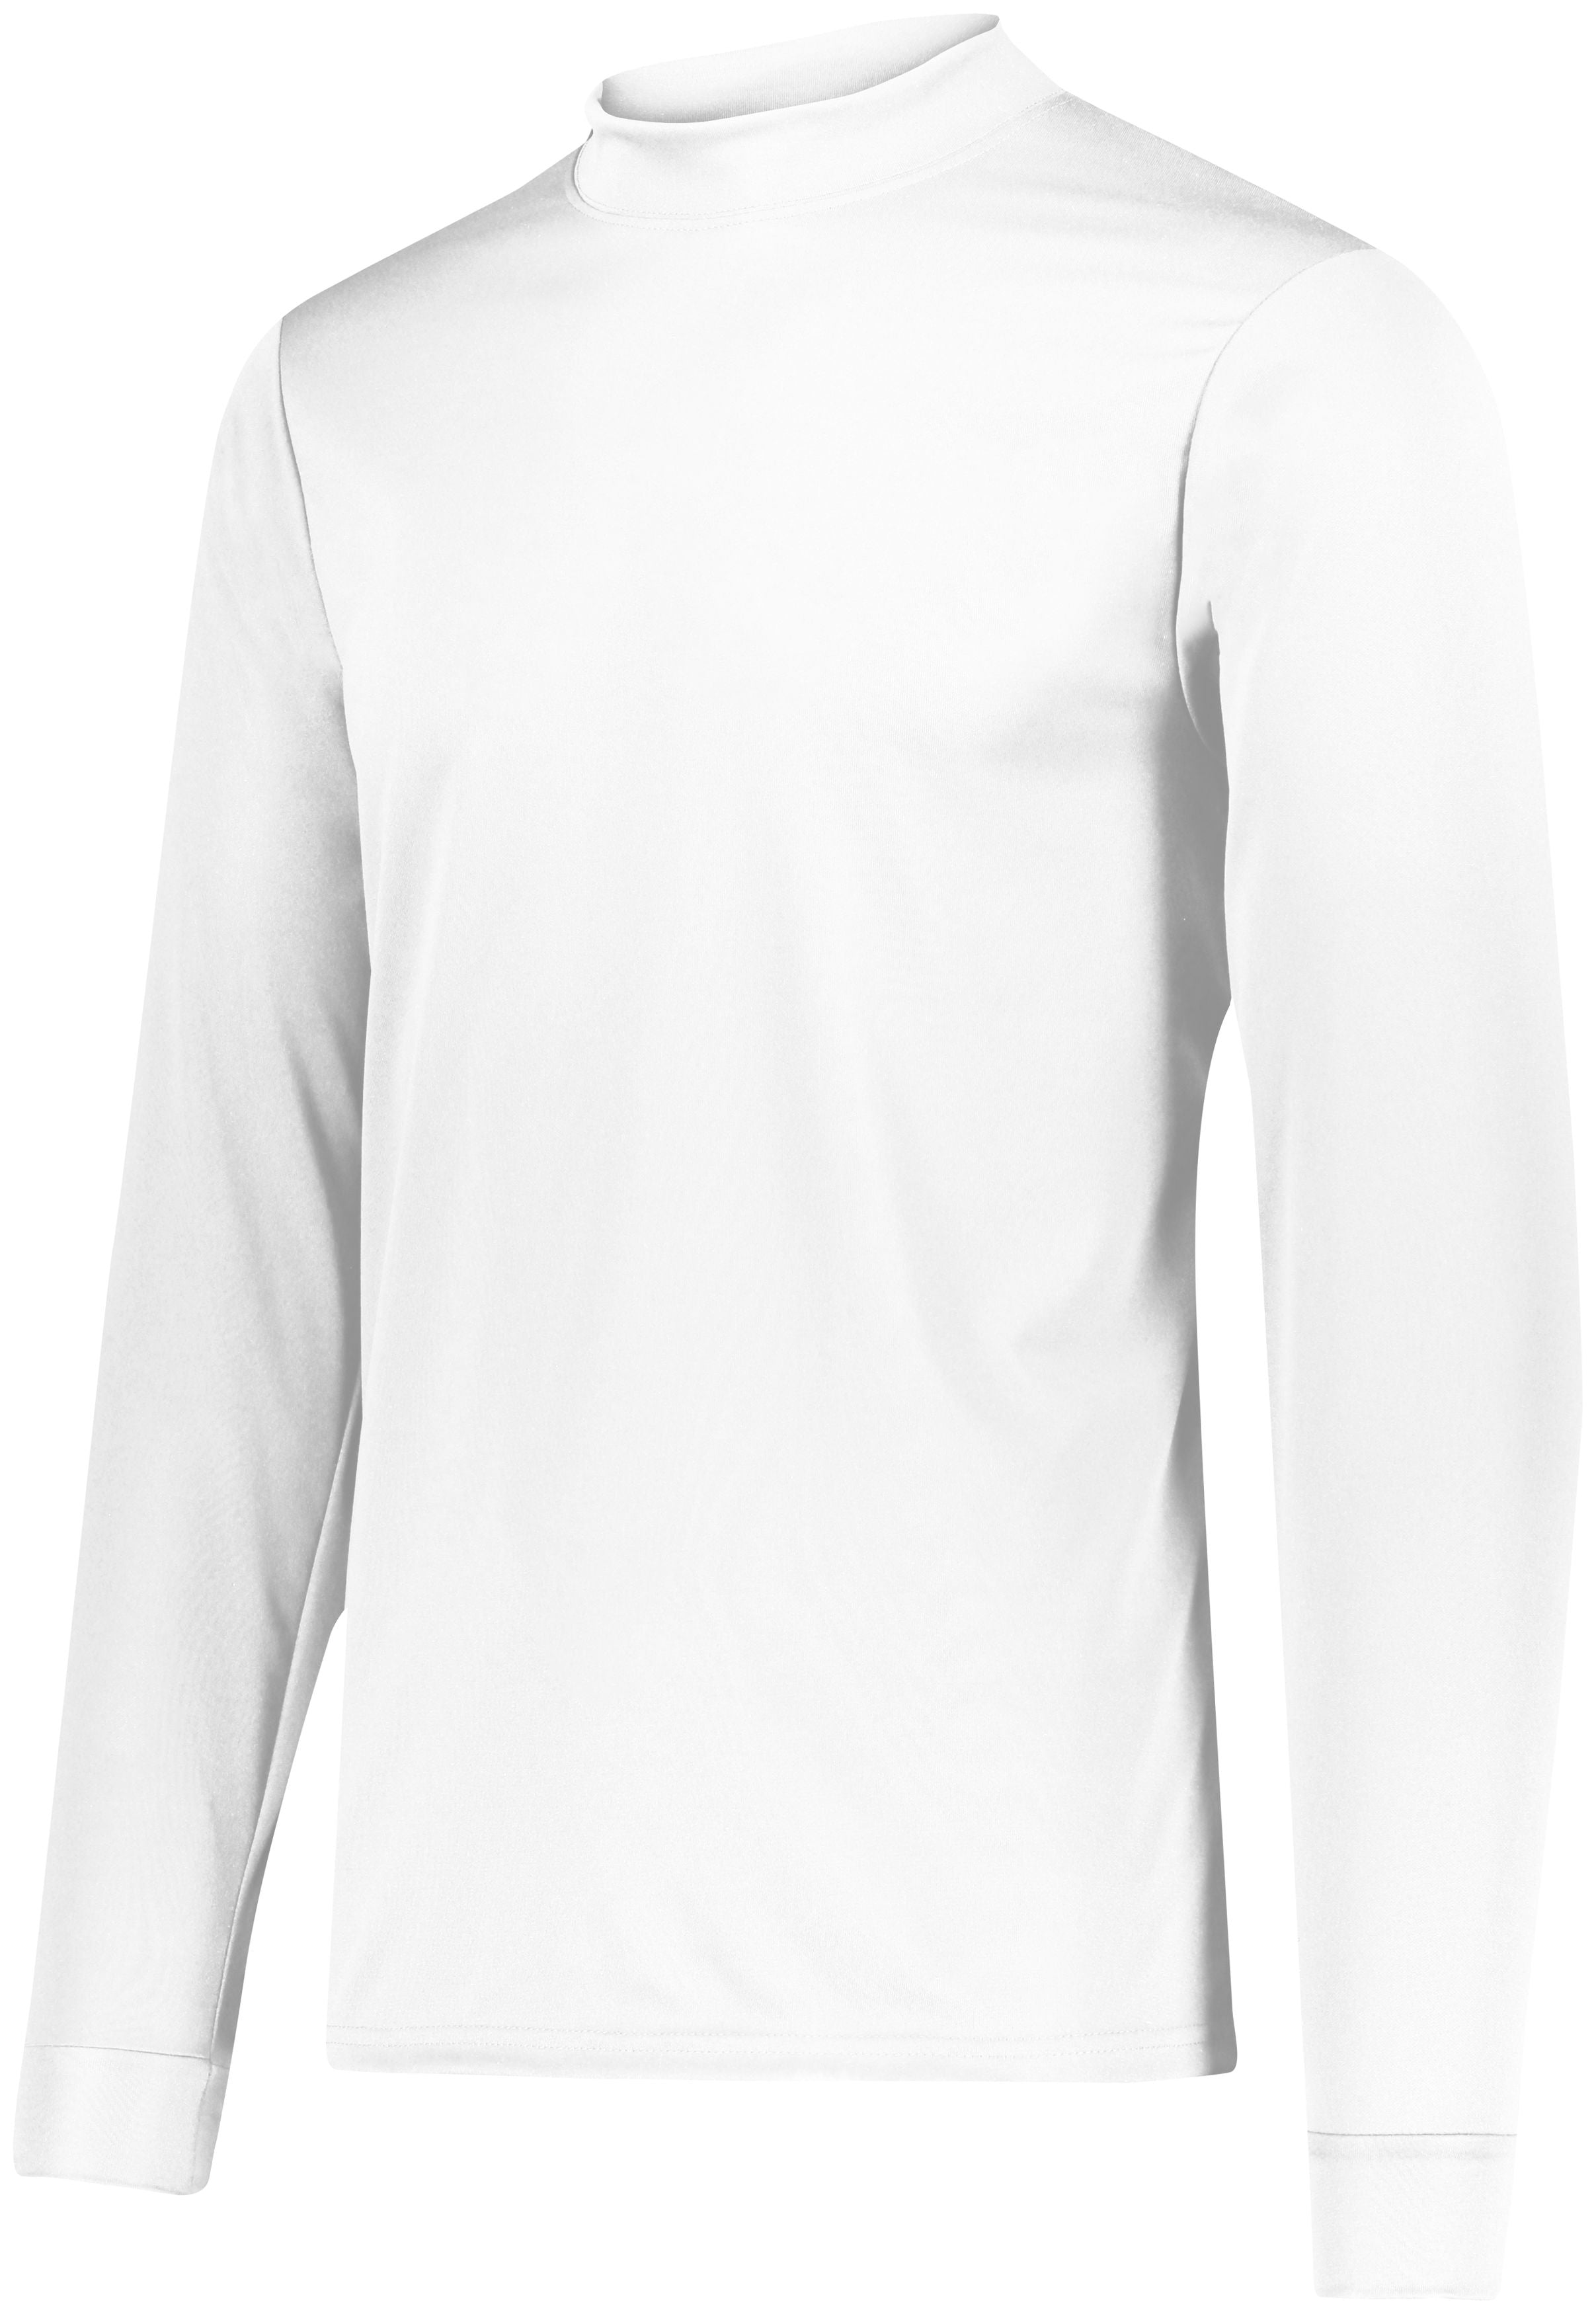 Augusta Sportswear Youth Wicking Mock Turtleneck in White  -Part of the Youth, Augusta-Products, Tennis, Shirts product lines at KanaleyCreations.com